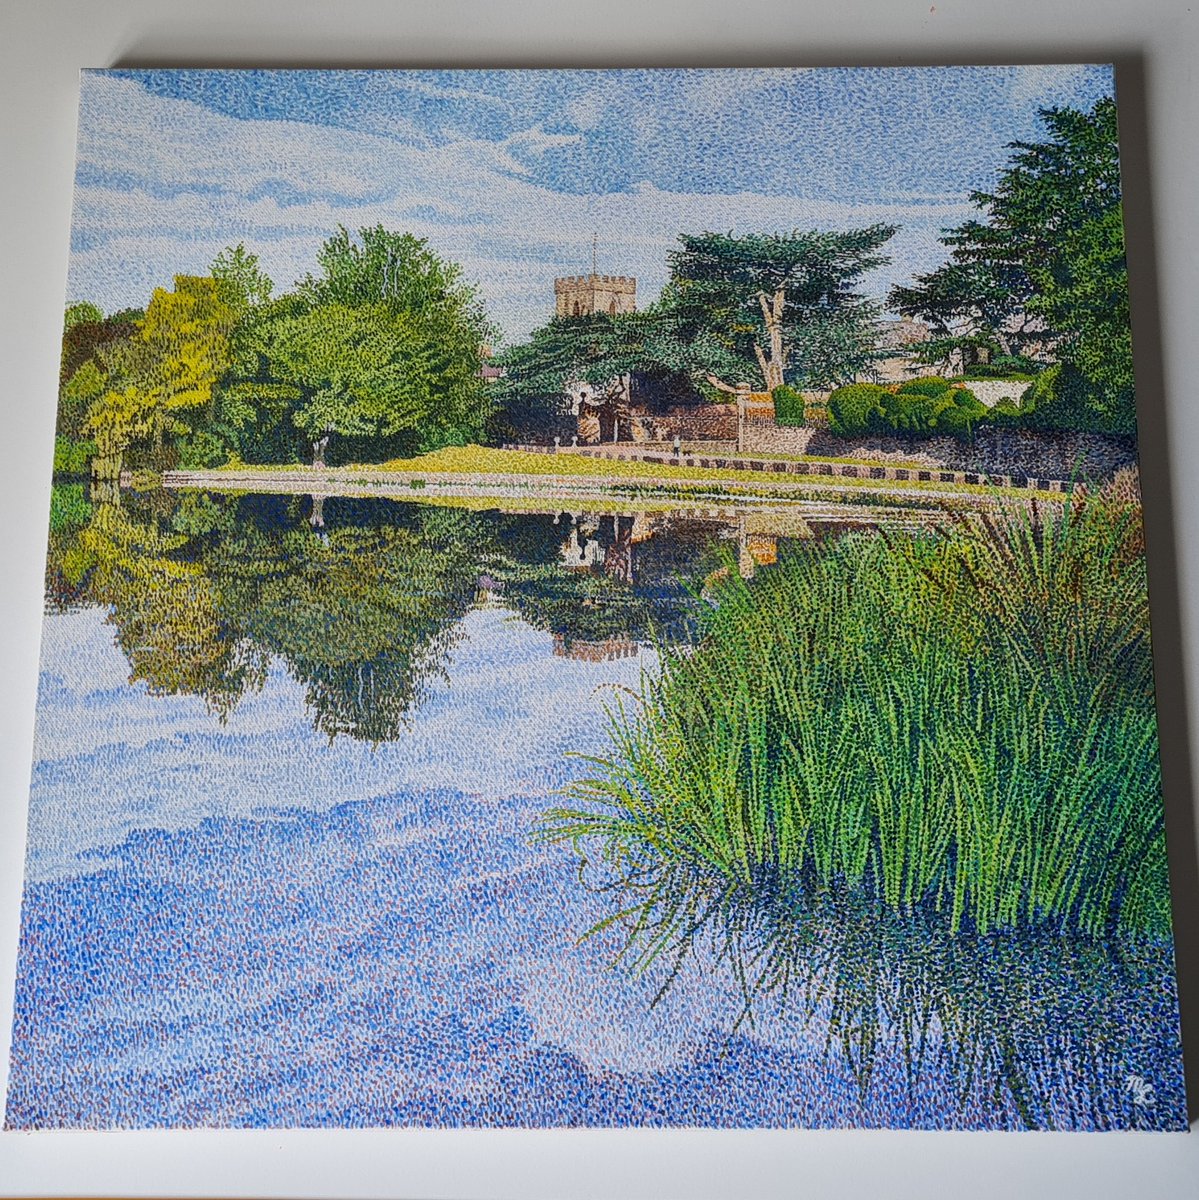 Would you say it is finished now?
And, maybe just call it
'Melbourne Pool'?
Oil on canvas - 50 x 50 cm

#ArtistOnTwitter #oiloncanvas #Derbyshire #derbyshireart #derbyshireartist #New #princeofpointillism #water #paintingoftheday #melbourne #melbournefestival #pointillism